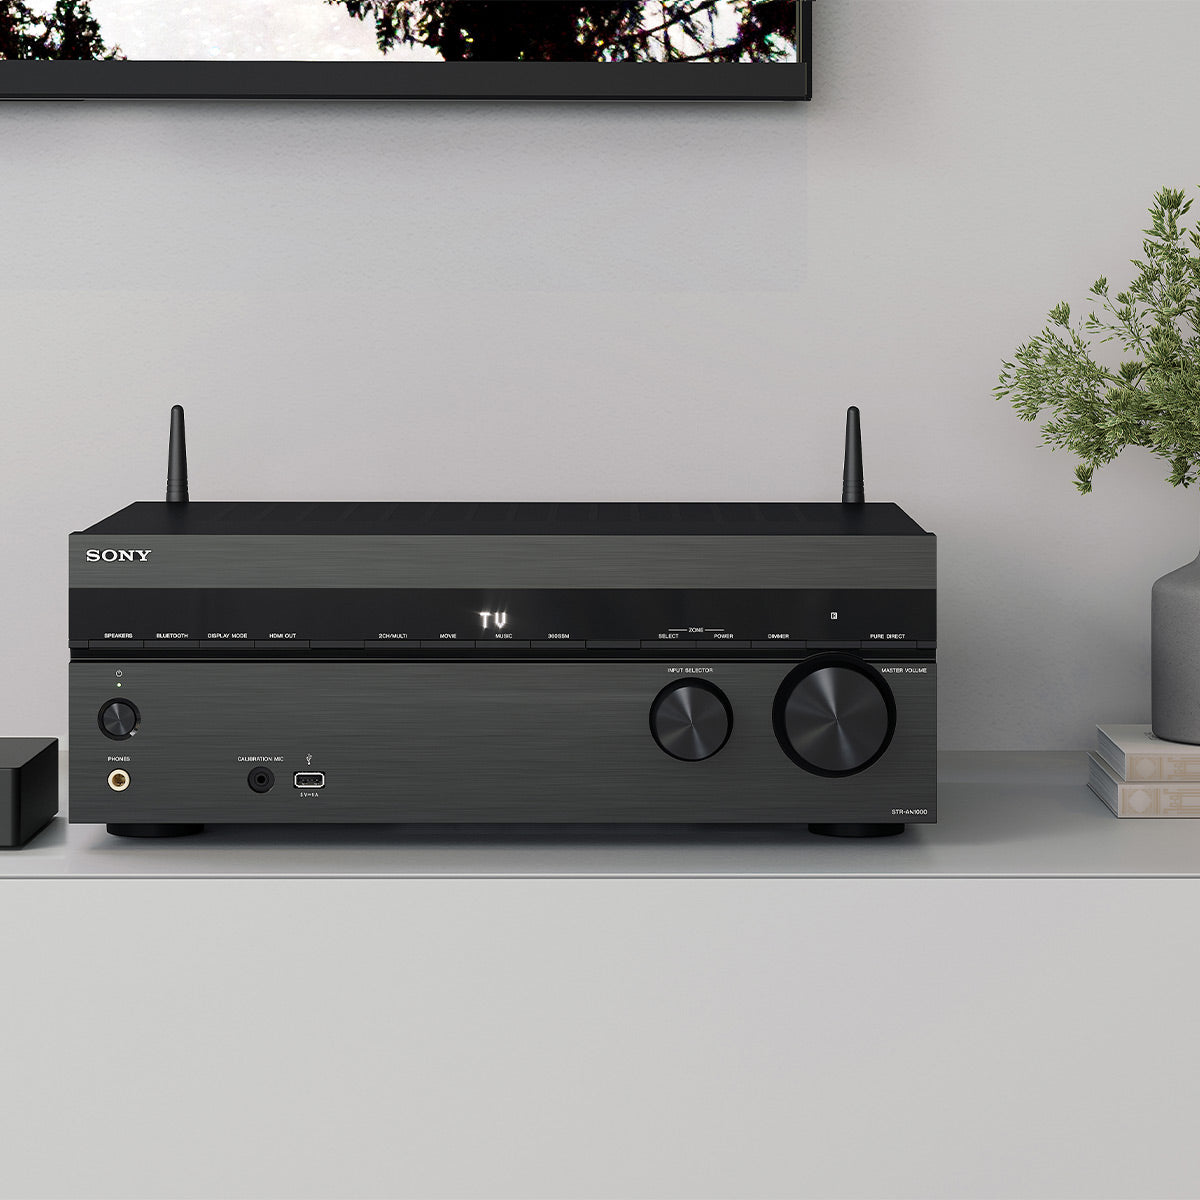 Sony STR-AN1000 7.2 Channel 8K Home Theater AV Receiver with Dolby Atmos, DTS: X, IMAX Enhanced, Google Assistant, & Works with Sonos